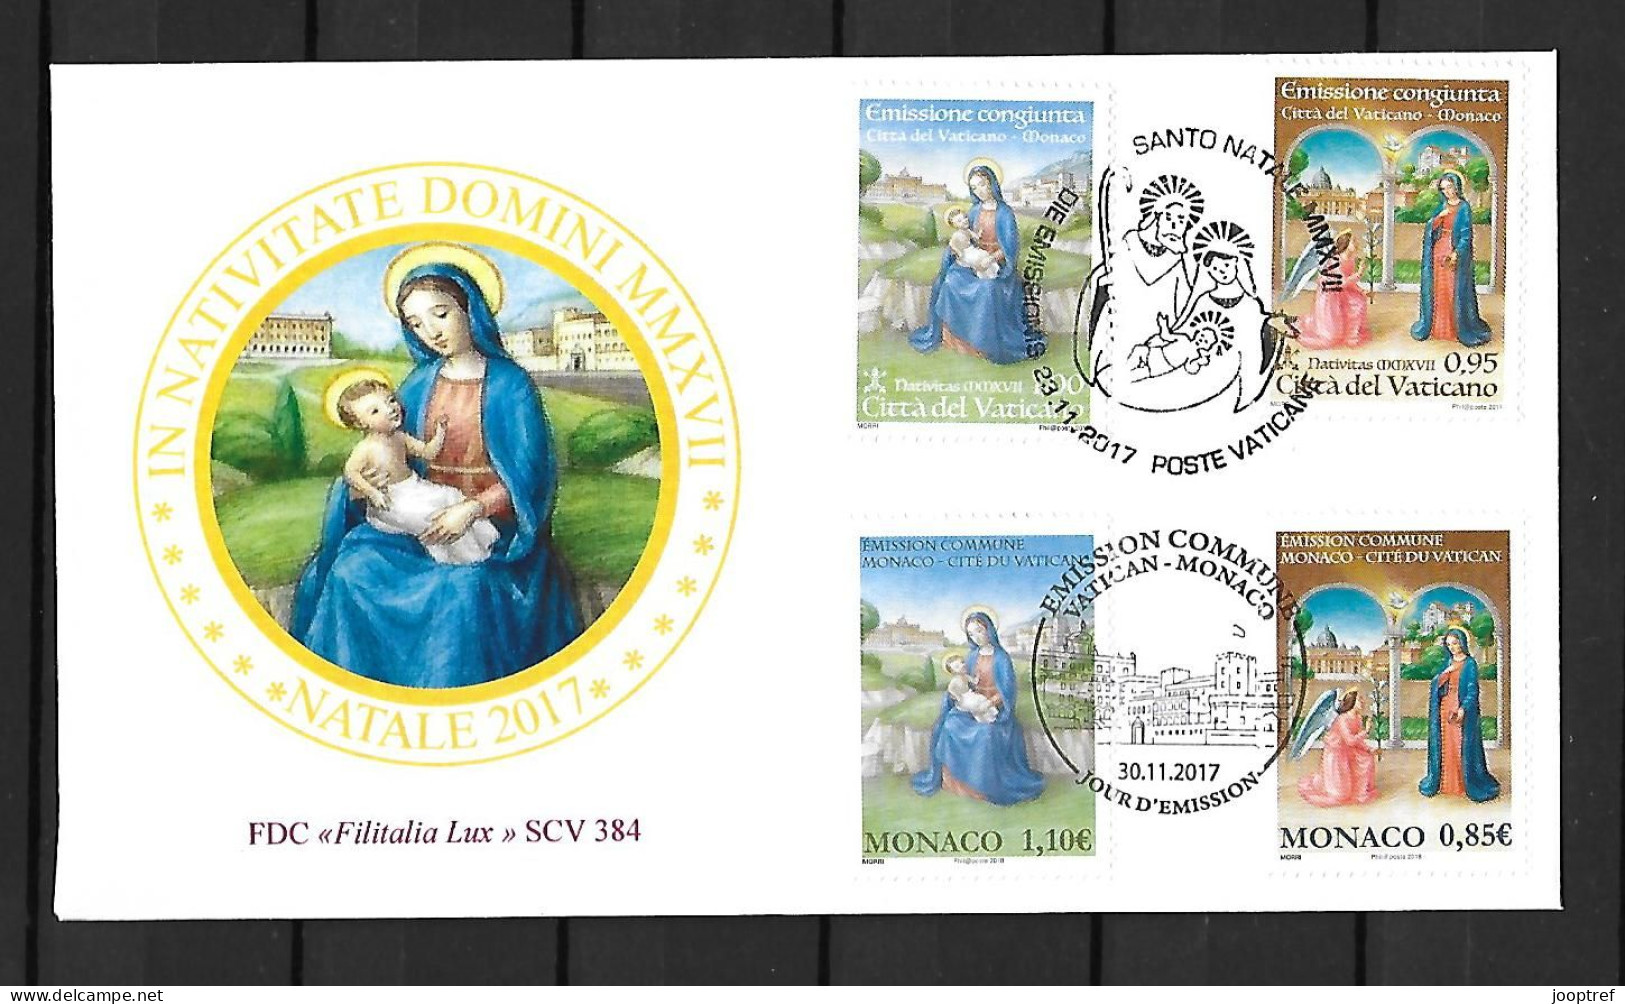 2017 Joint/Commune/Congiunta Vatican And Monaco, MIXED FDC WITH 2+2 STAMPS: Christmas - Emisiones Comunes